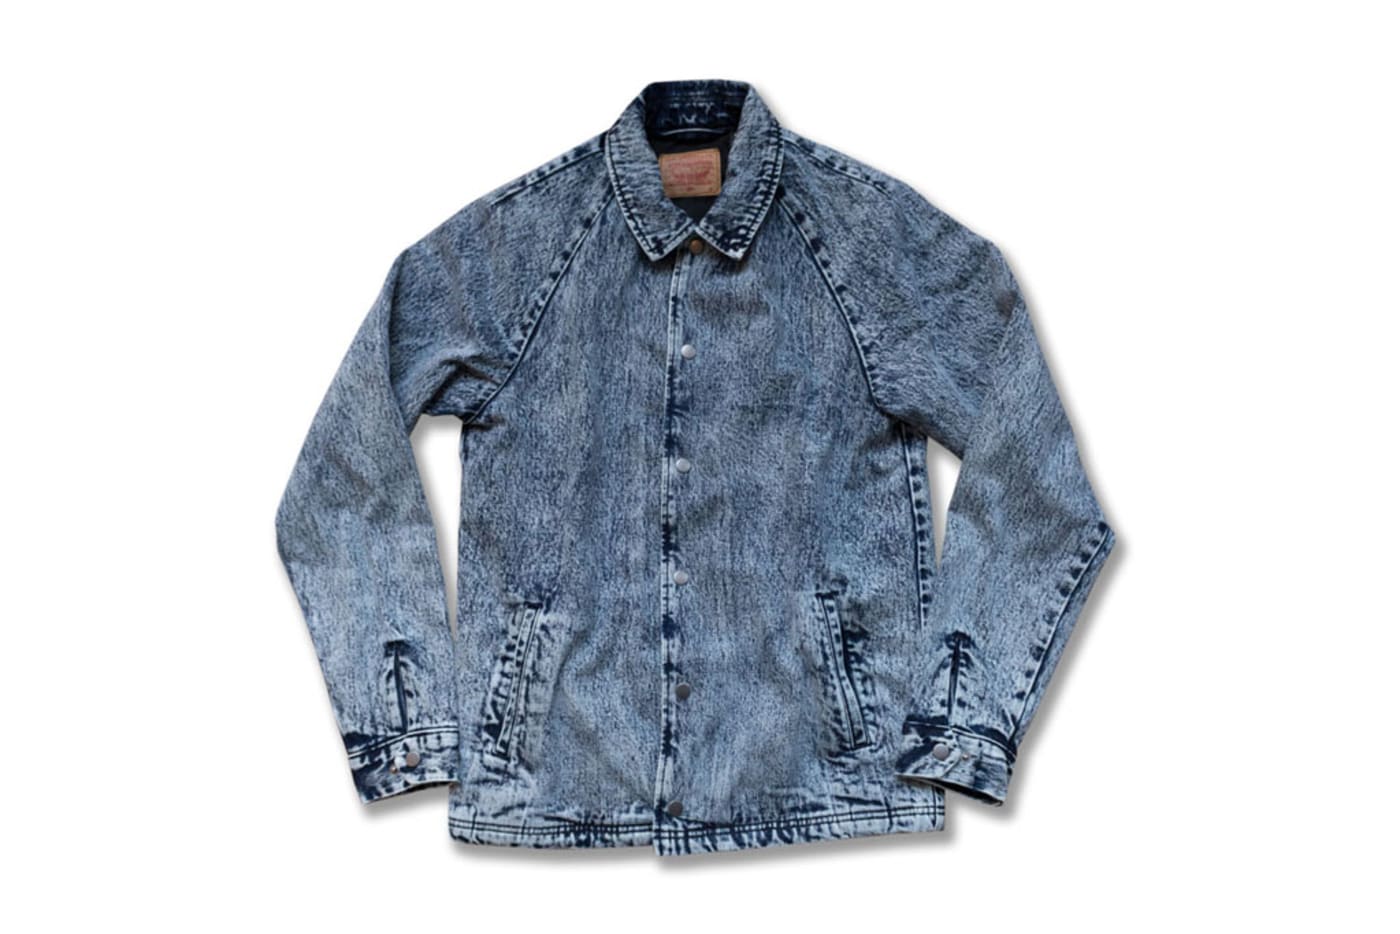 tøj Bugt beskydning Patta x Levi's Unveil the Second Part of Their Indigo Collection | Complex  UK